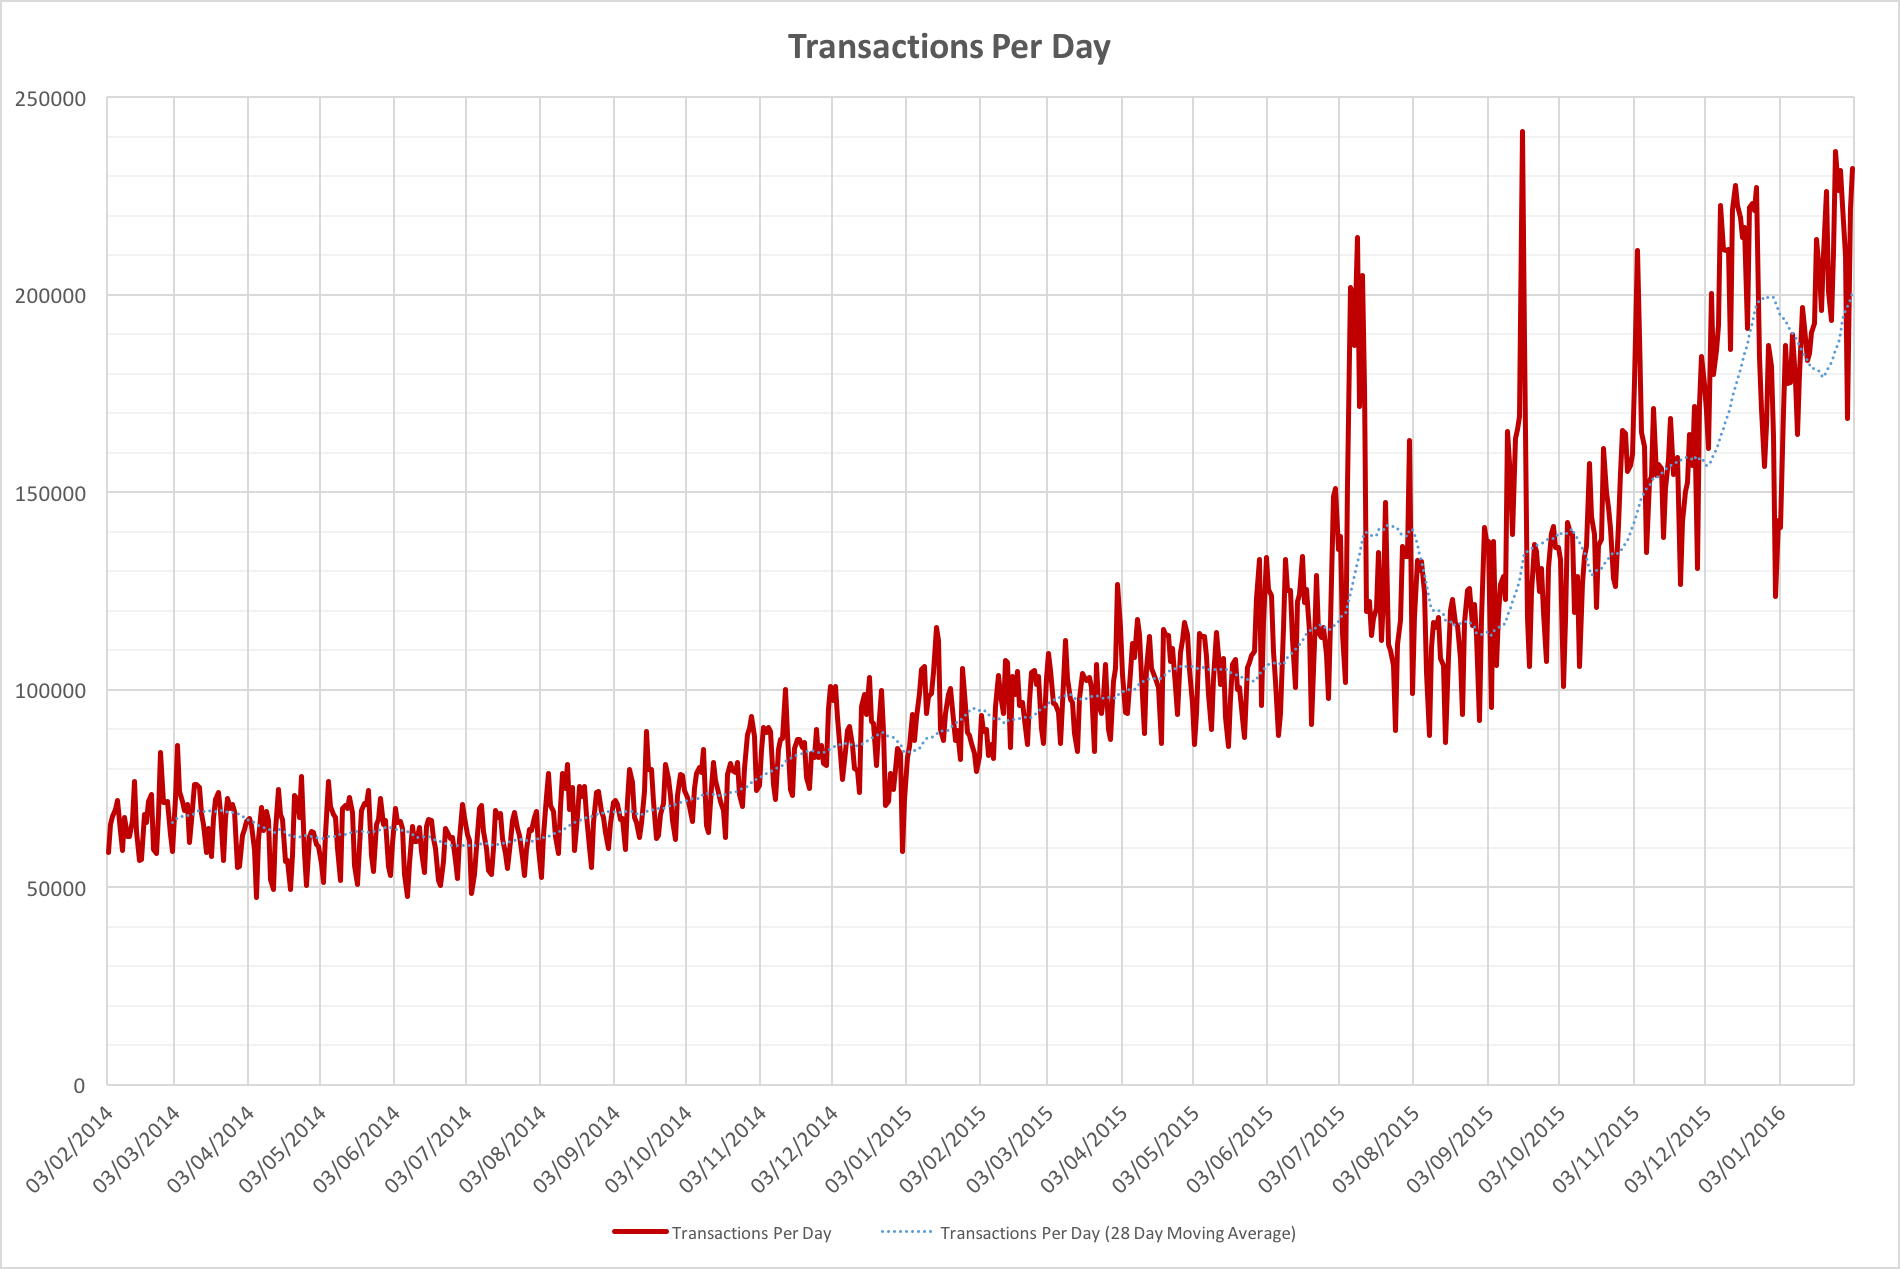 Transactions per day in the Bitcoin network